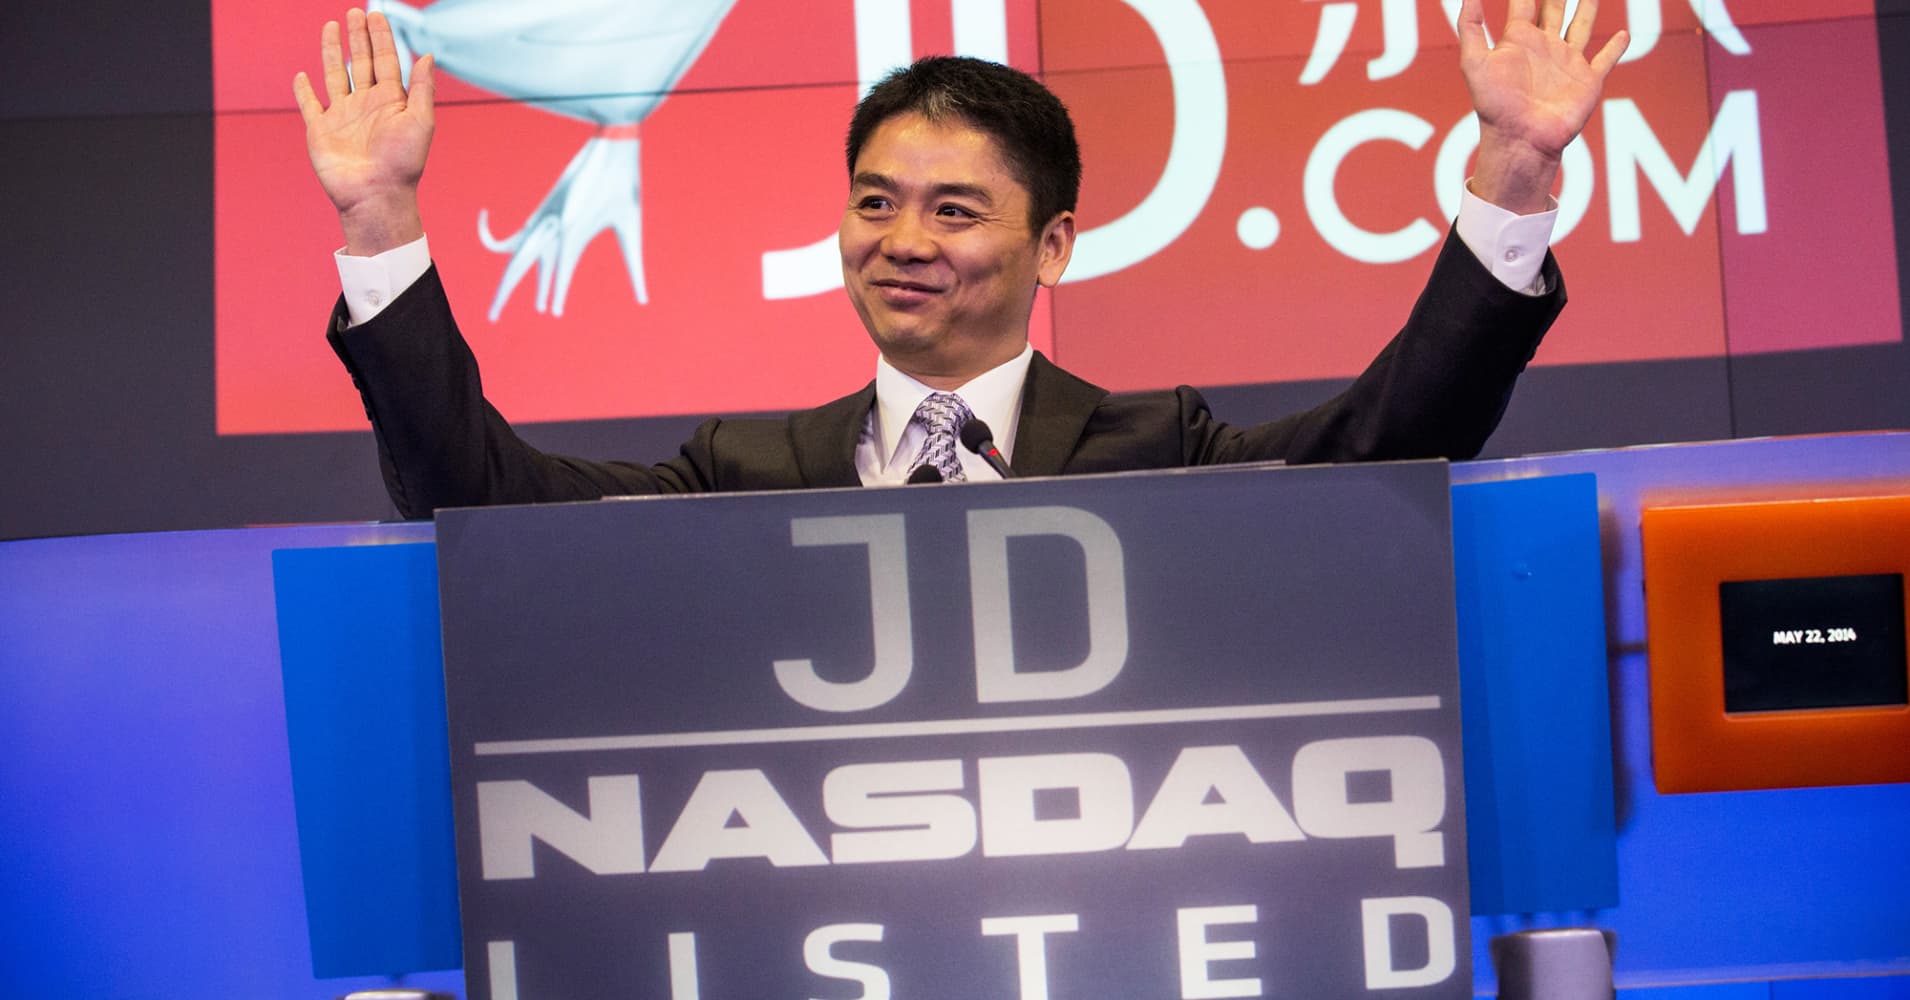 JD.com founder, a Chinese billionaire, is arrested in Minnesota on sexual misconduct charges